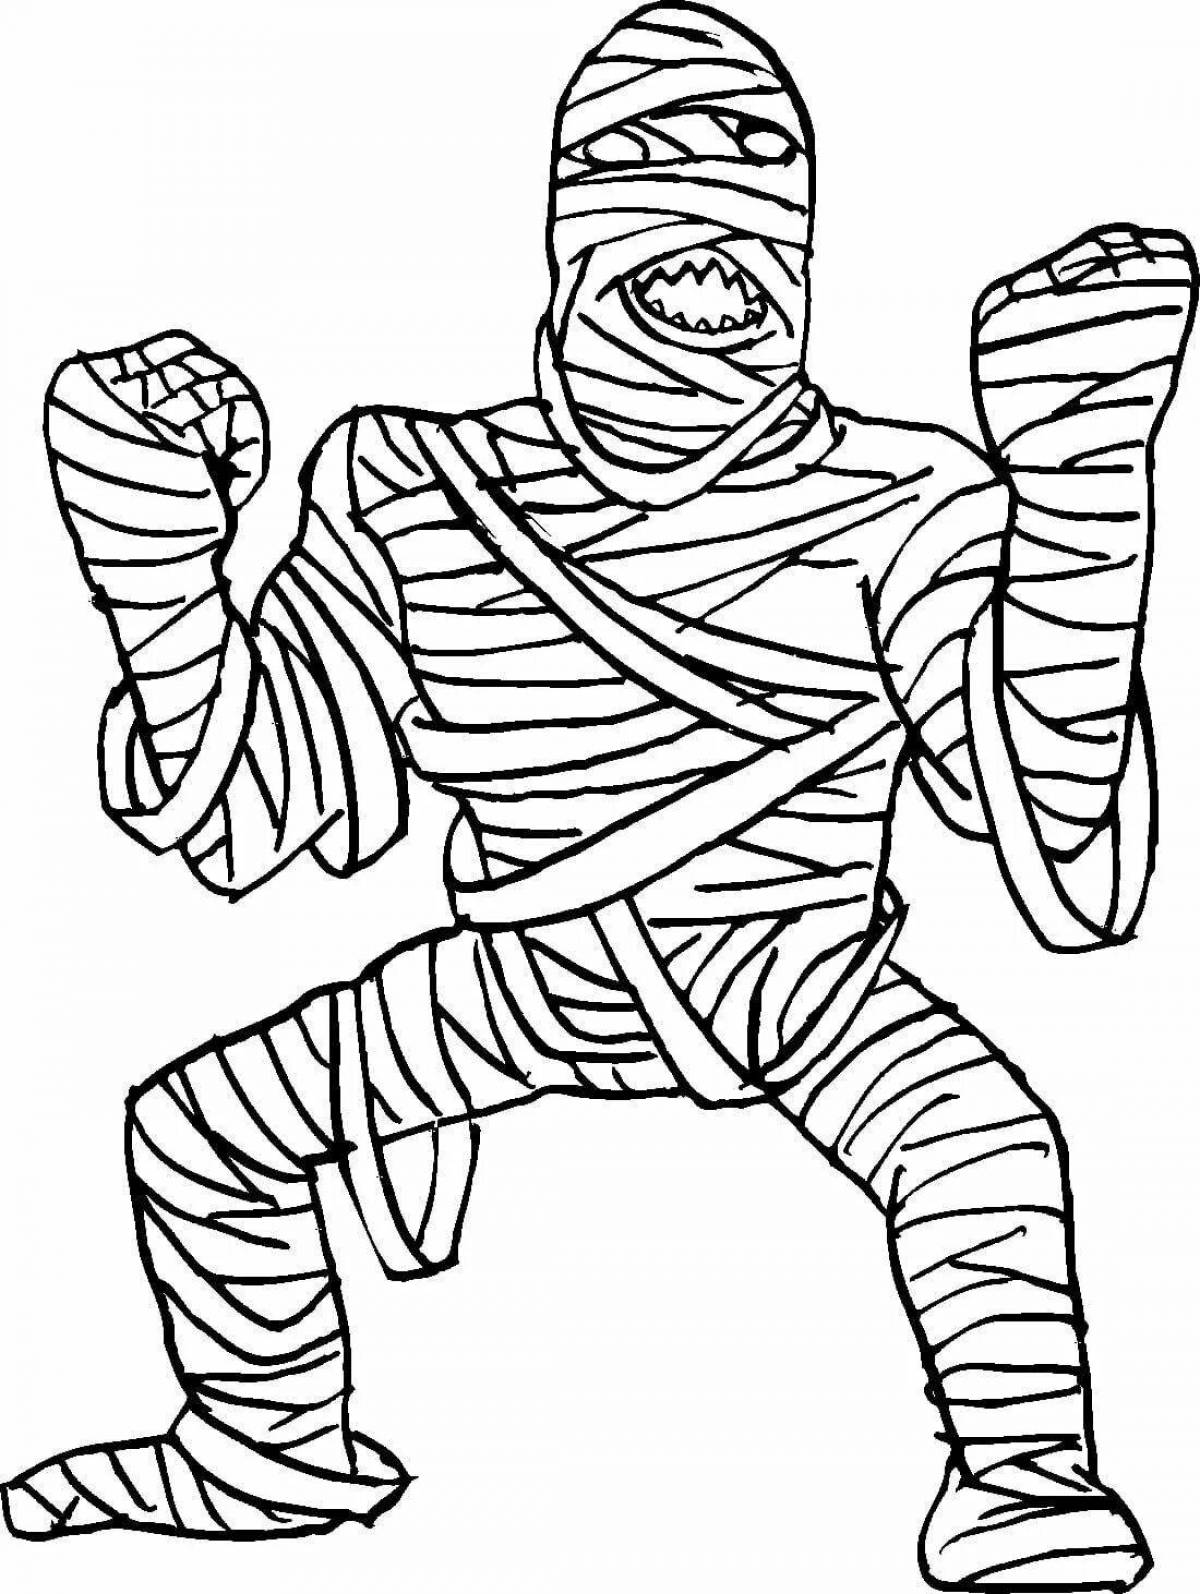 Frightening mummy coloring page